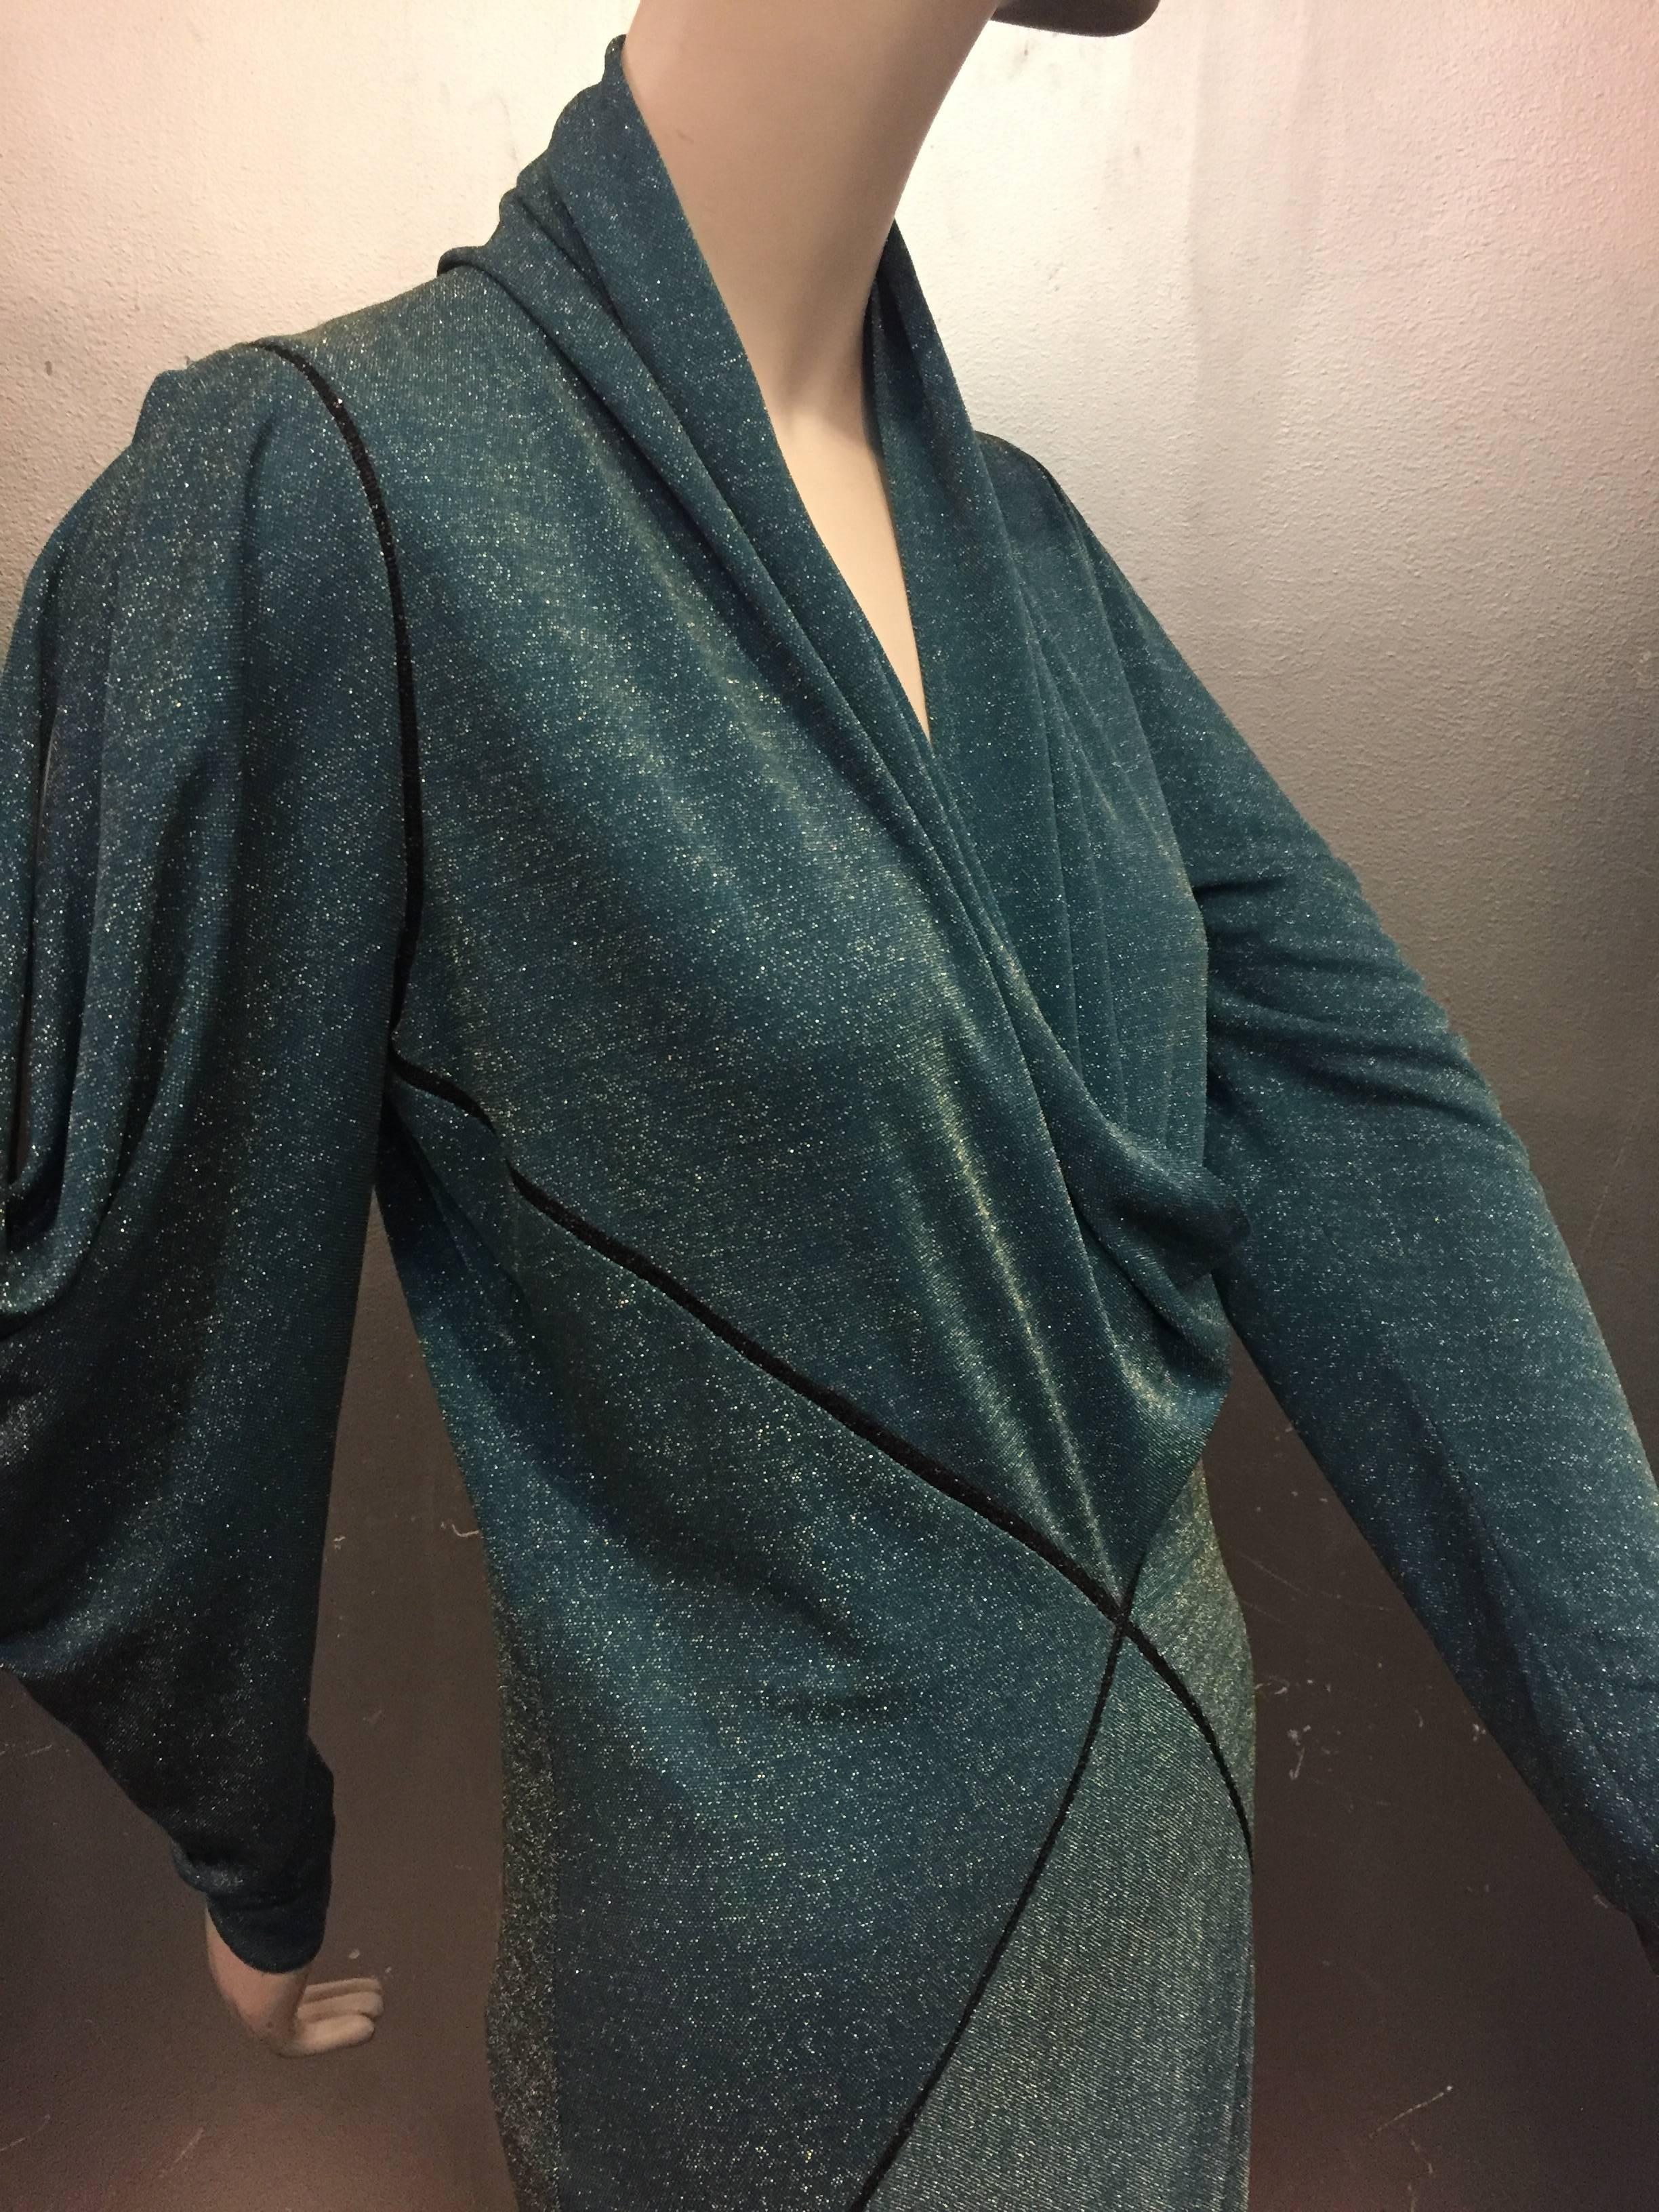 A gorgeous early 1980s Janice Wainwright teal and silver lurex jersey gown with bias draped neckline, sleeves and hem, all arranged in a harlequin diamond design trimmed in braid at seams. 